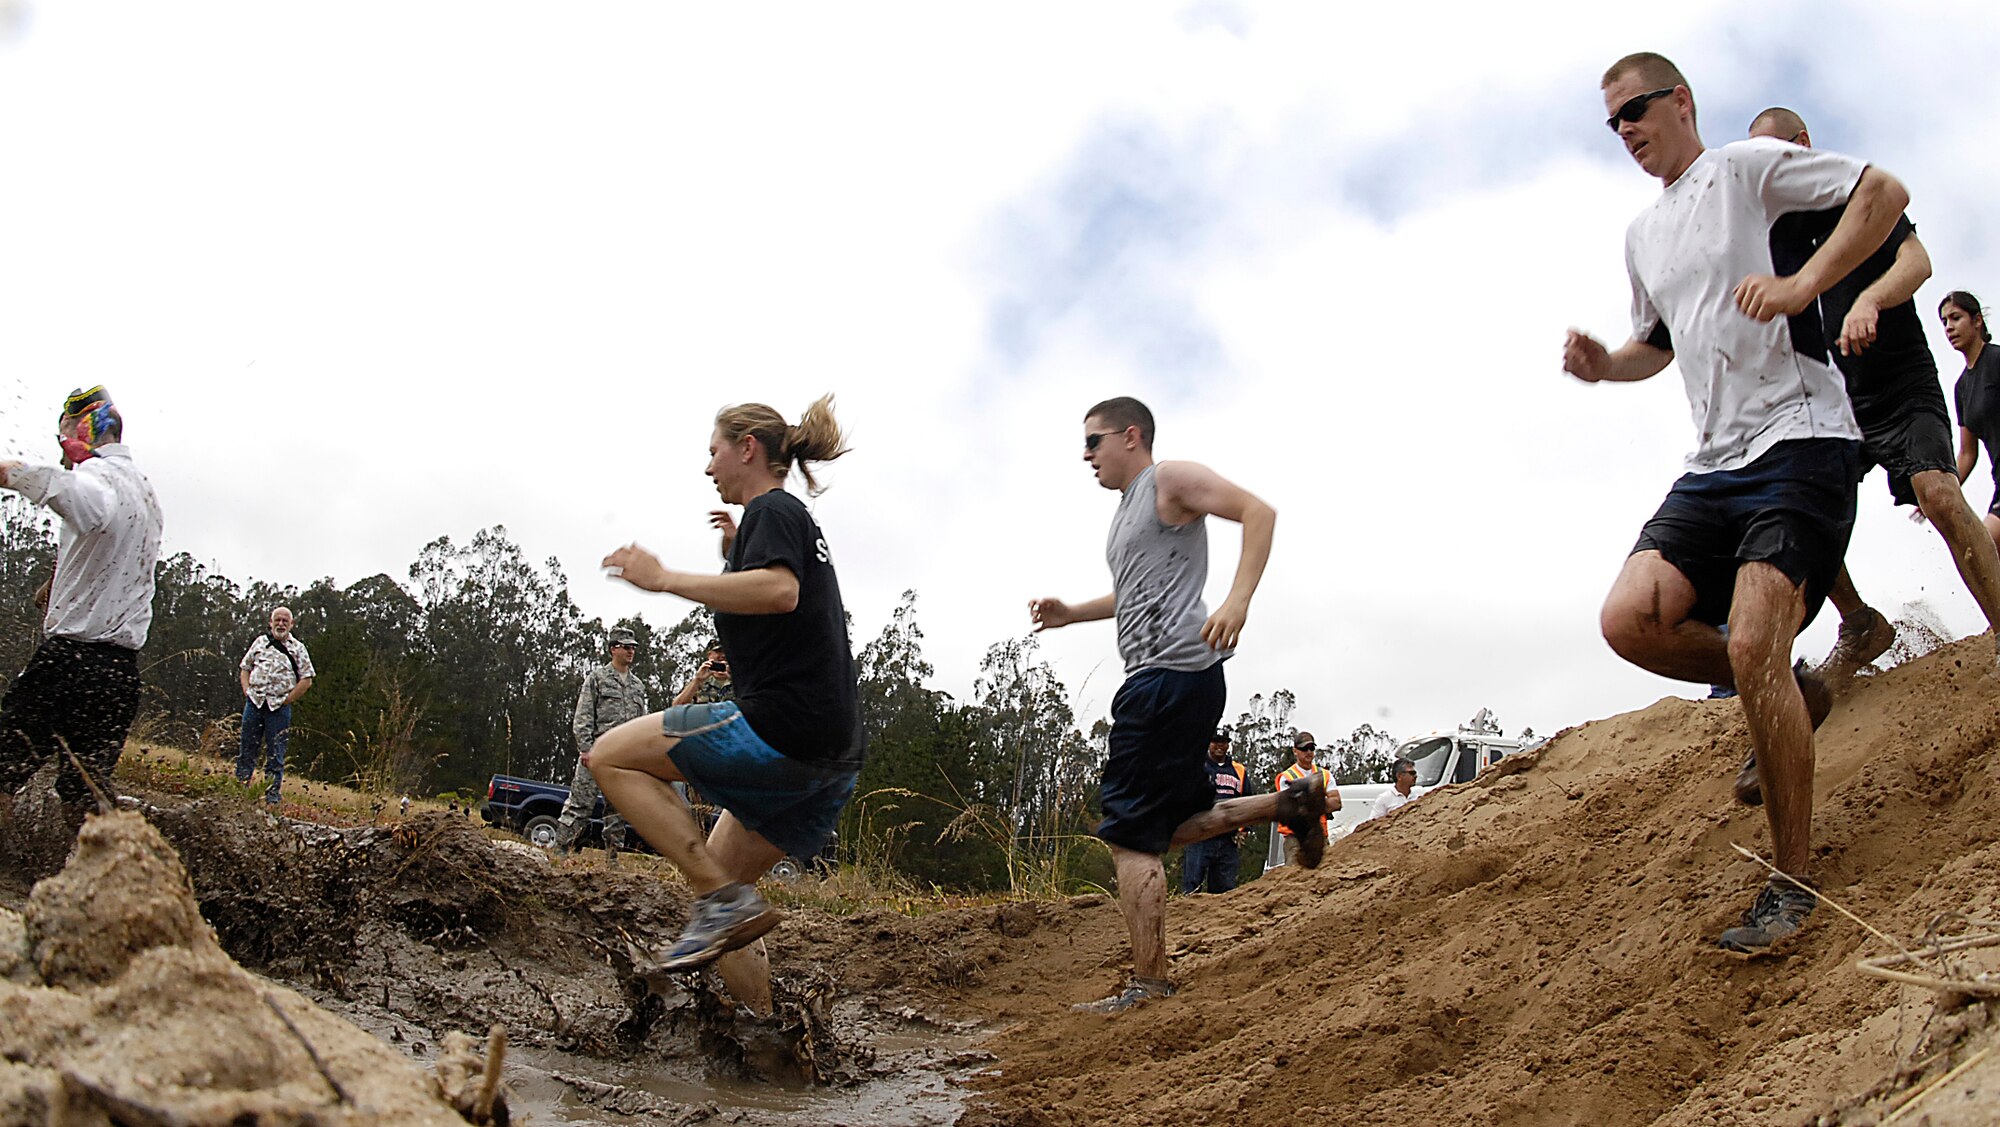 VANDENBERG AIR FORCE BASE, Calif. -- Members of Team V take part in the Vandenberg Warrior Challenge Mud Run on June 30 here. Approximately 1,200 runners took on the five-mile course, which covered paved roads, off-road vehicle trails and the base obstacle course. Sixty teams participated in the event. (U.S. Air Force photo/Staff Sgt. Vanessa Valentine)